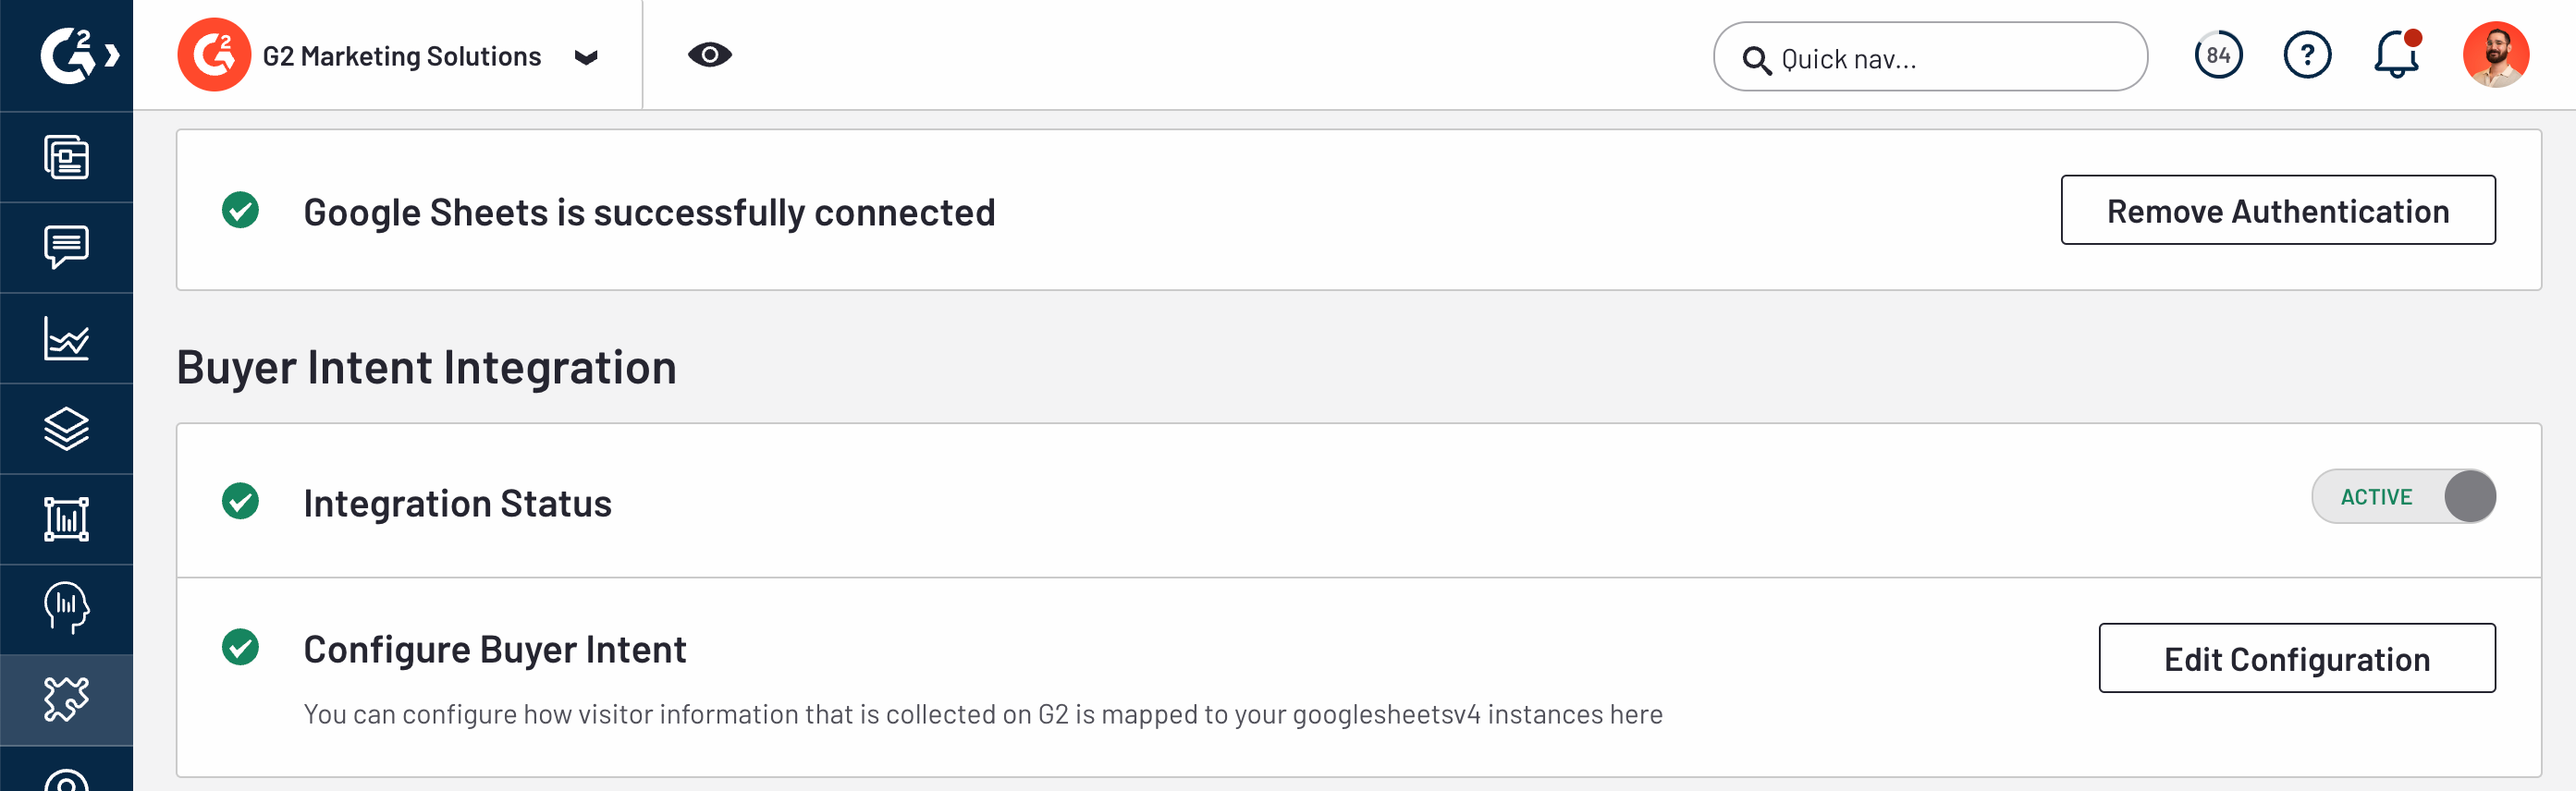 A successful implementation setup screen that shows that Google Sheets access is authenticated, the Integration Status is active, and Buyer Intent is configured. 